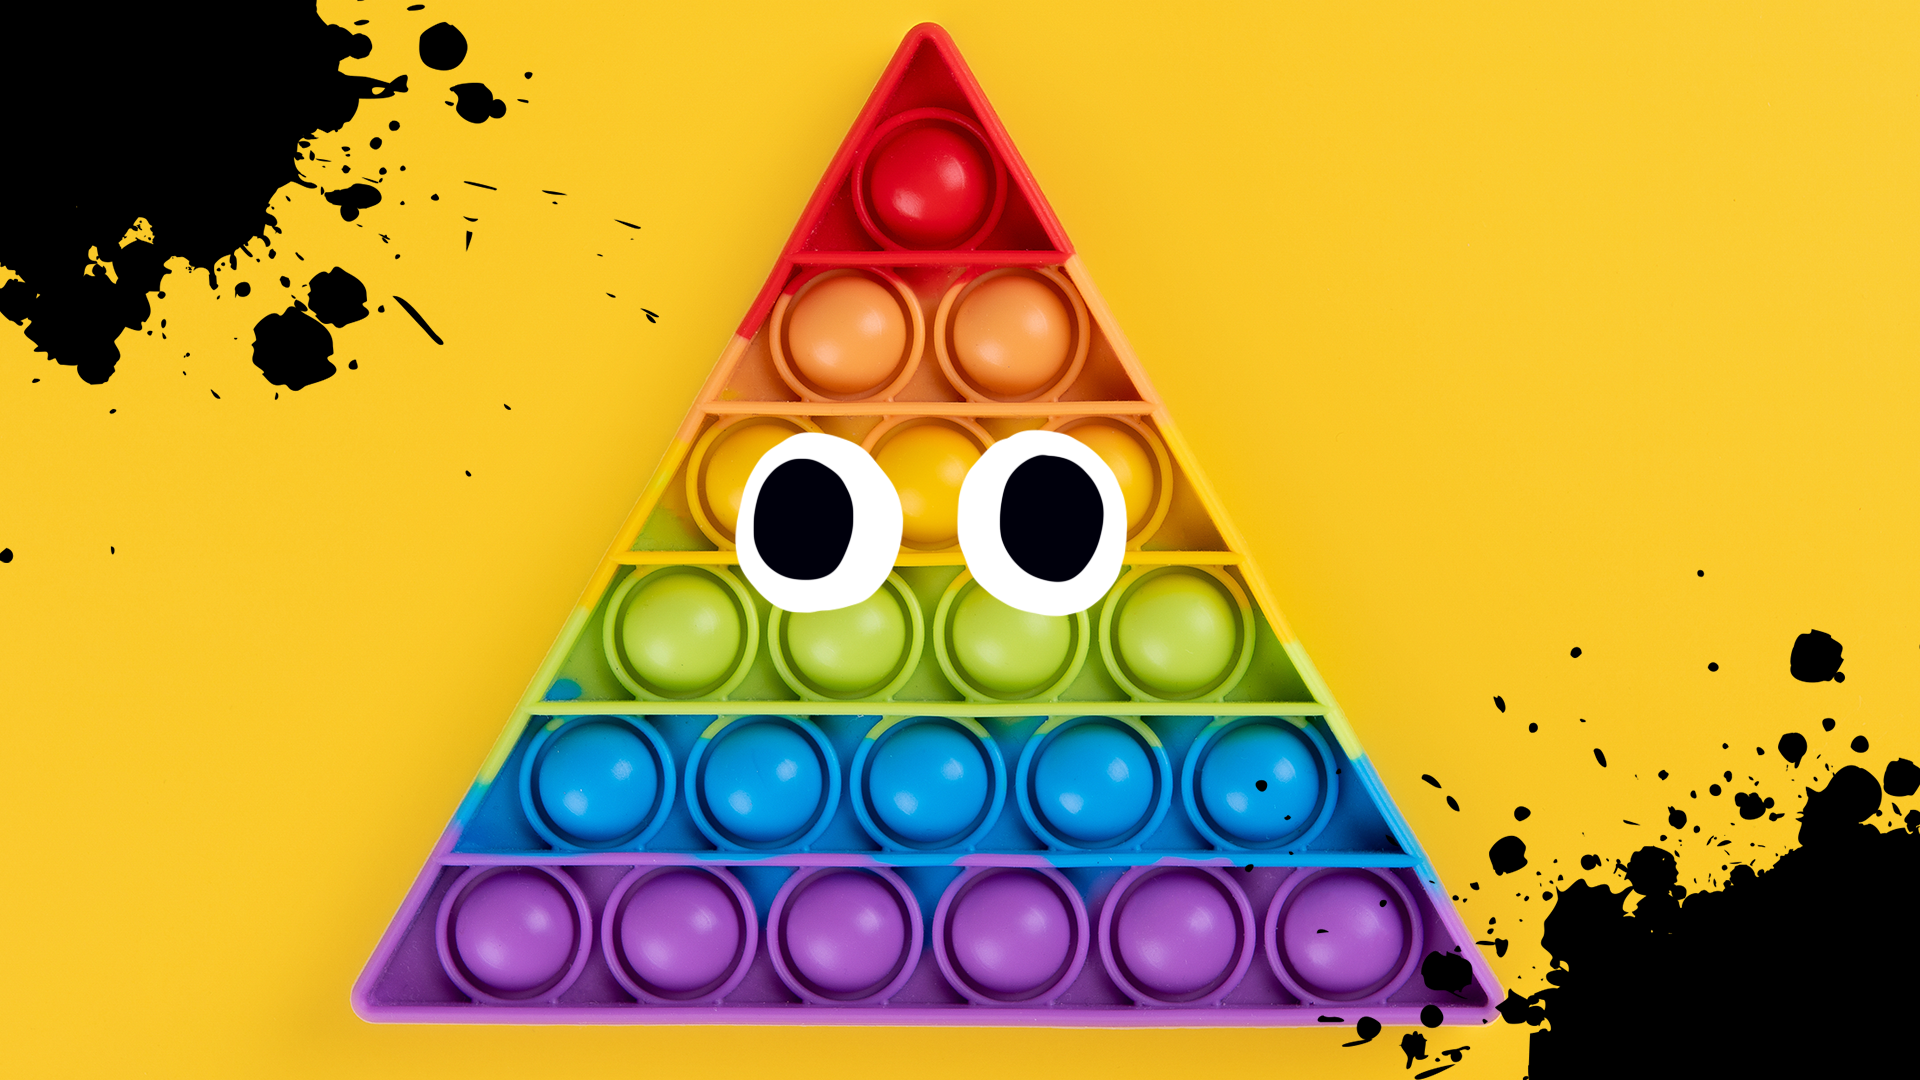 Rainbow triangle on yellow background with splats